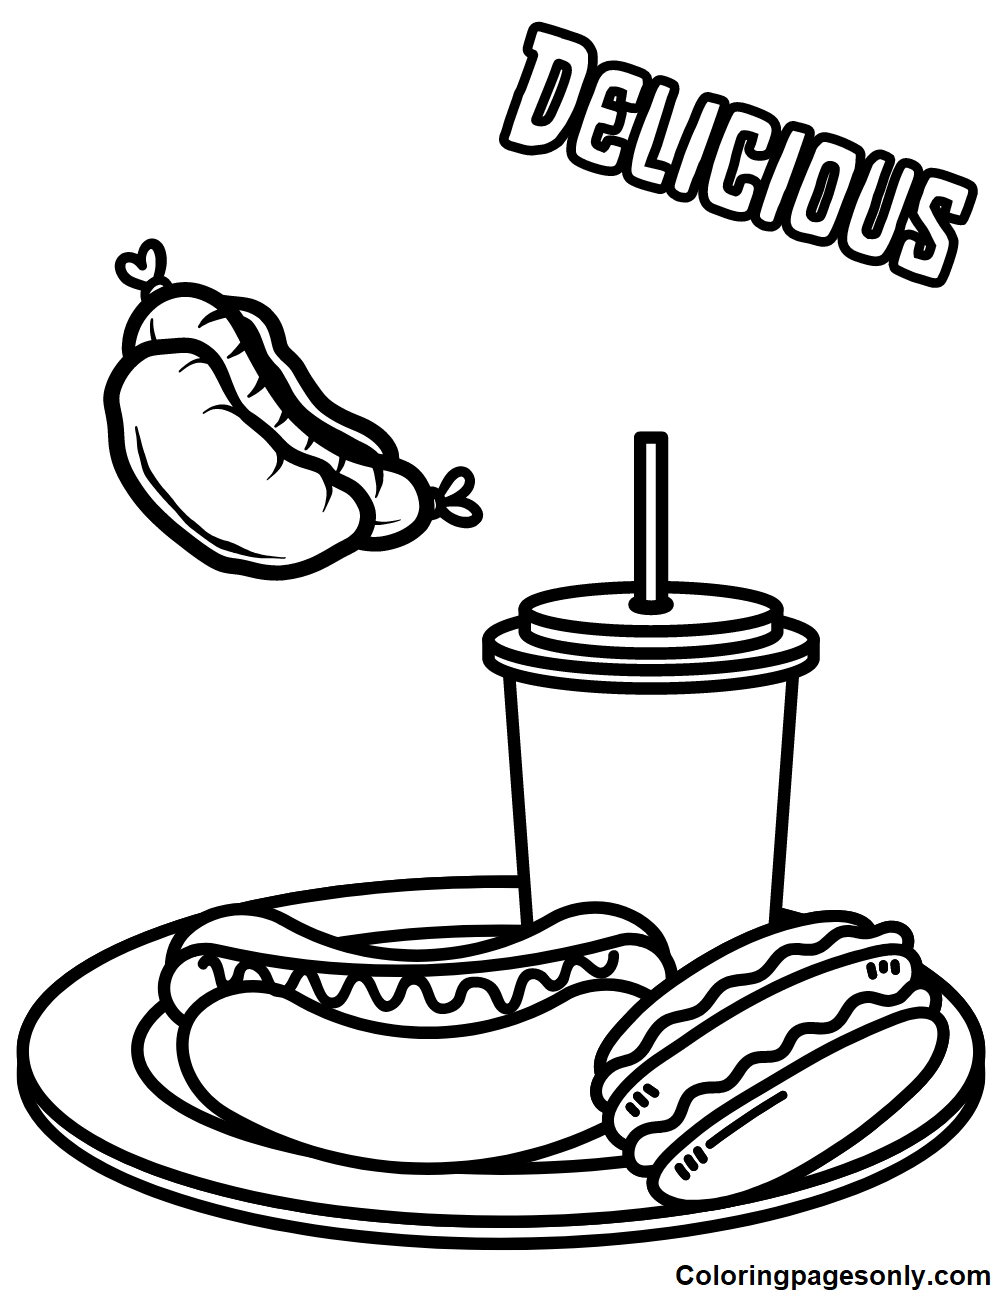 Hot Dogs and Soda Coloring Pages